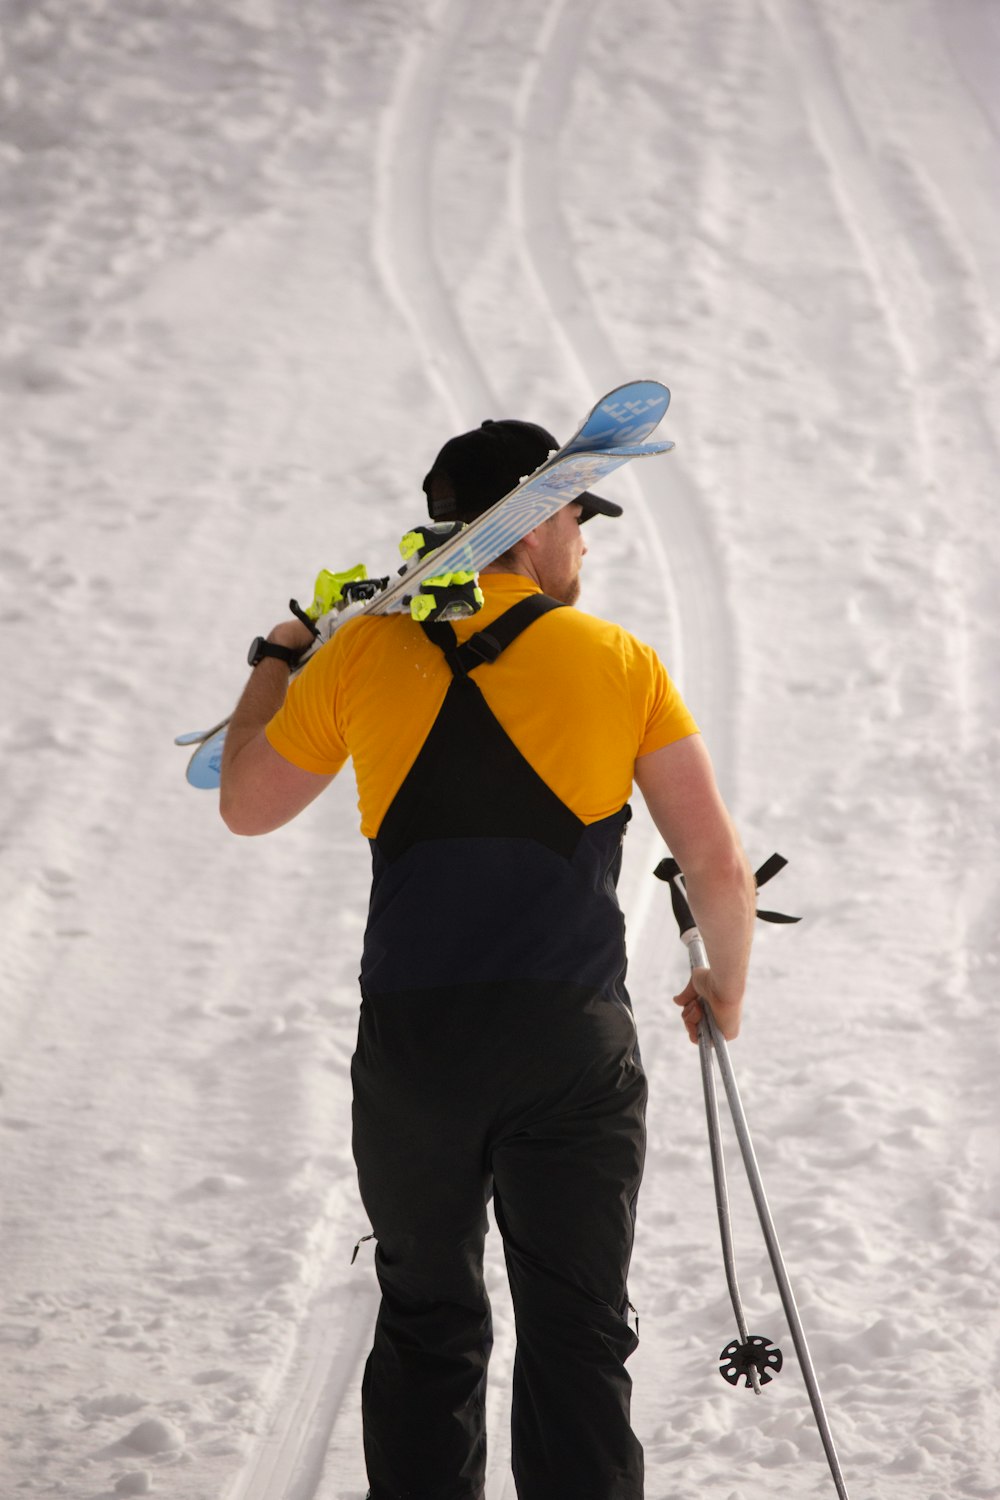 a man with skis and ski poles walking in the snow